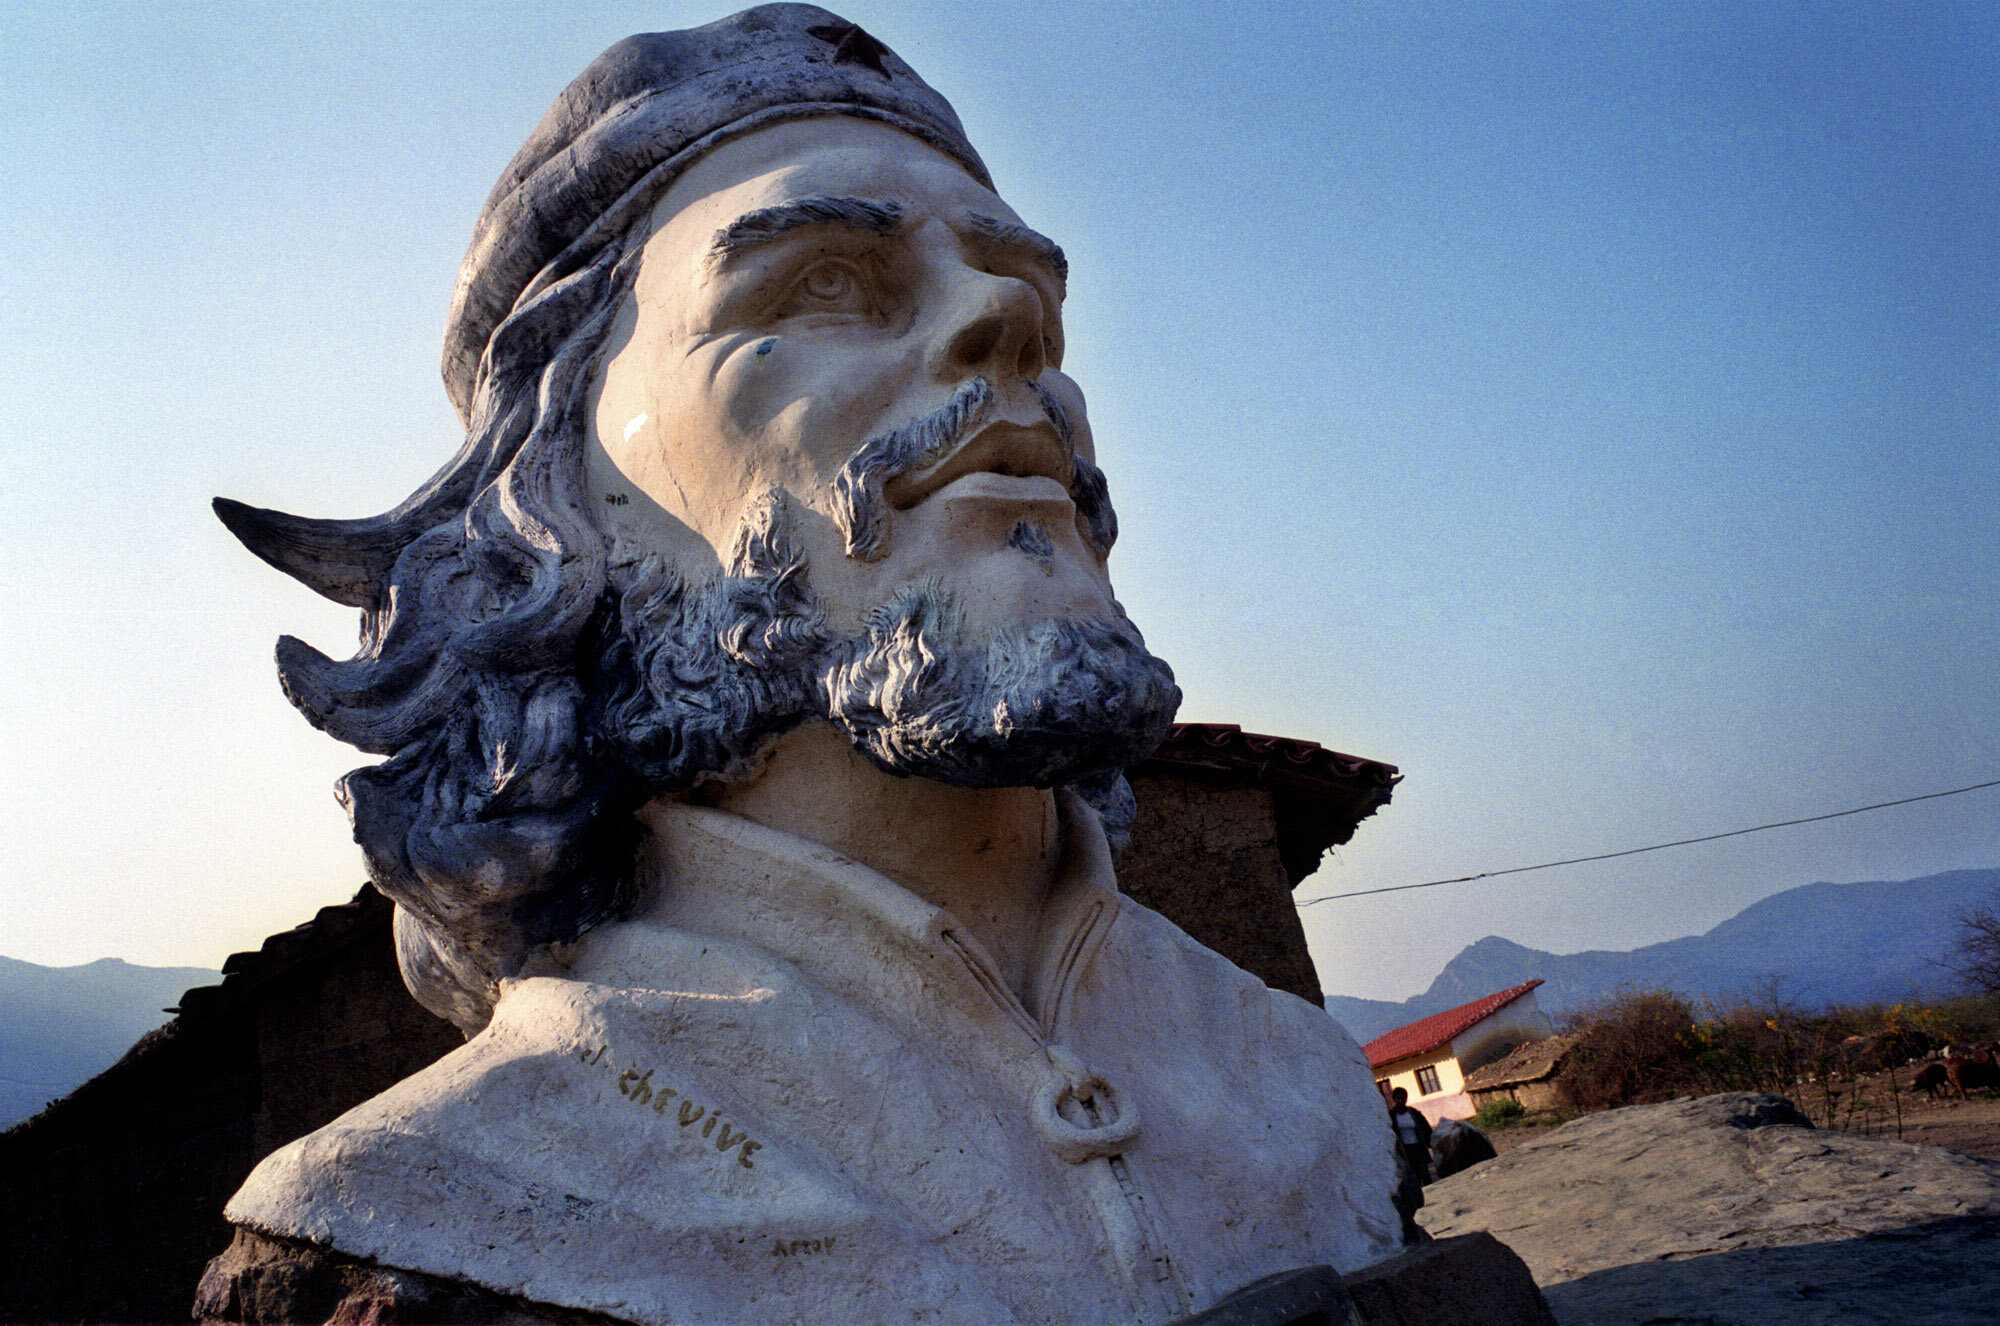  Che Guevara bust in La Higuera and the school where he was shot on Oct 9, 1967, in the background. 